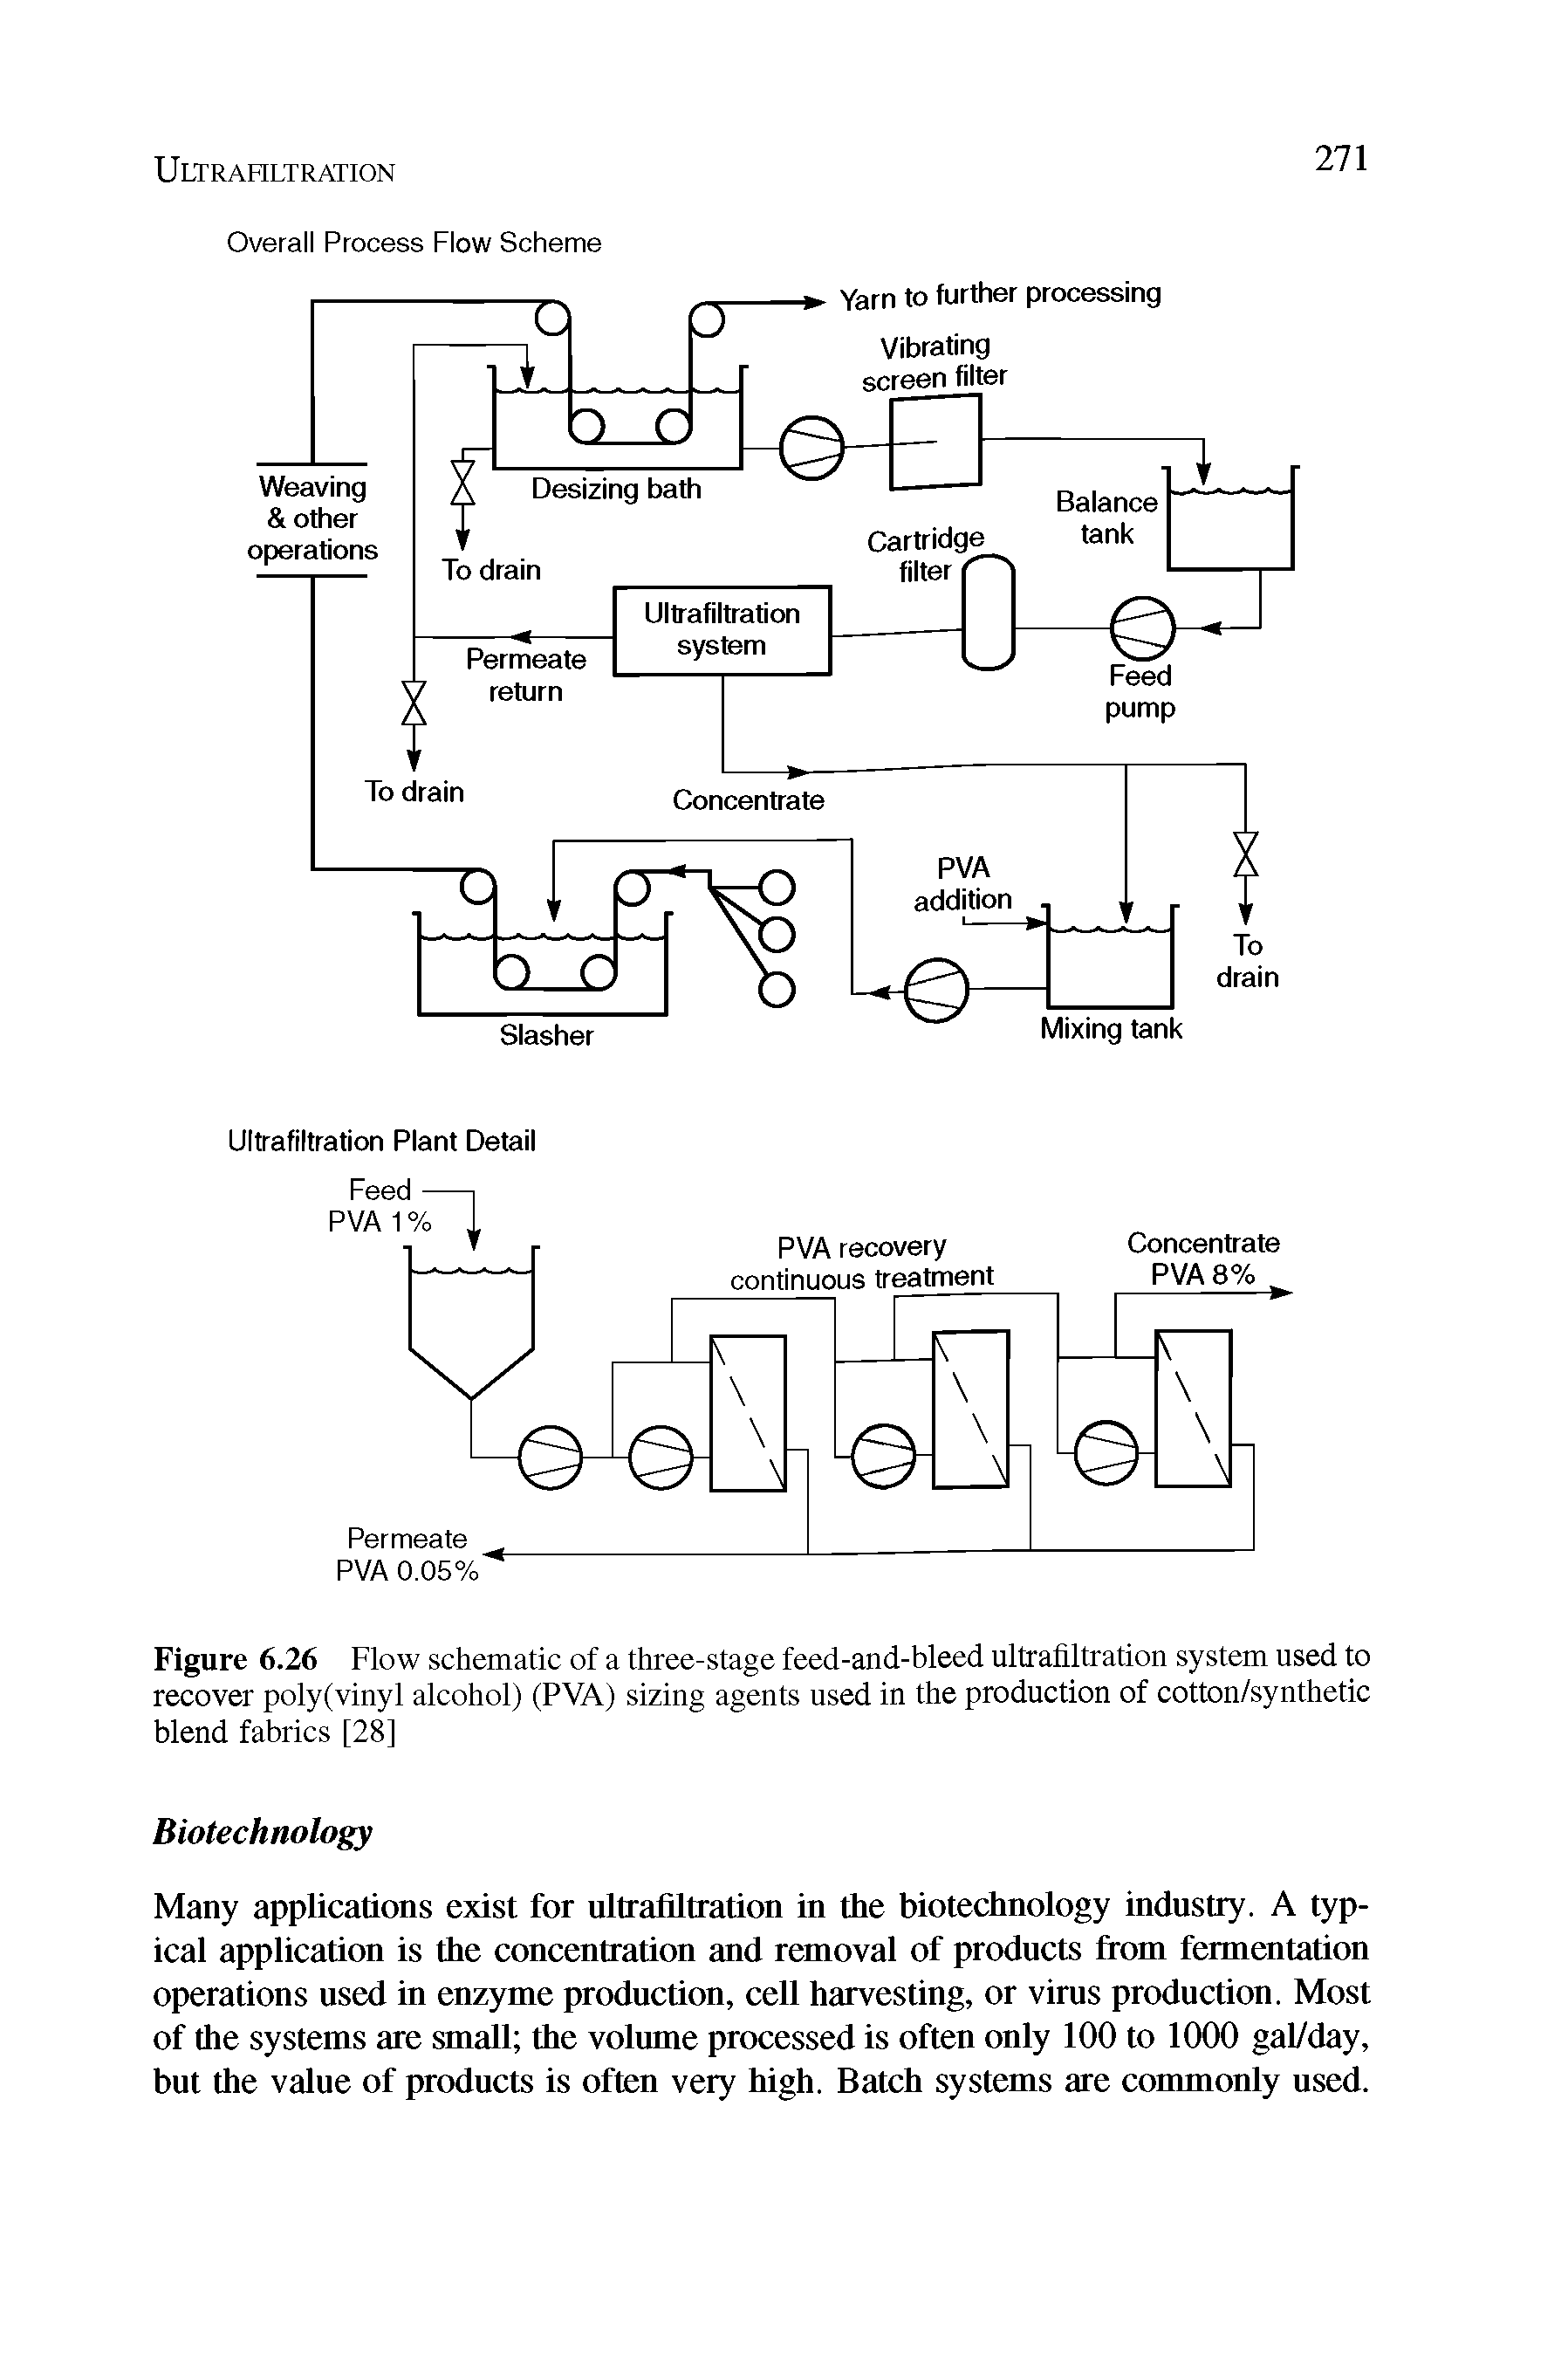 Figure 6.26 Flow schematic of a three-stage feed-and-bleed ultrafiltration system used to recover poly(vinyl alcohol) (PVA) sizing agents used in the production of cotton/synthetic blend fabrics [28]...